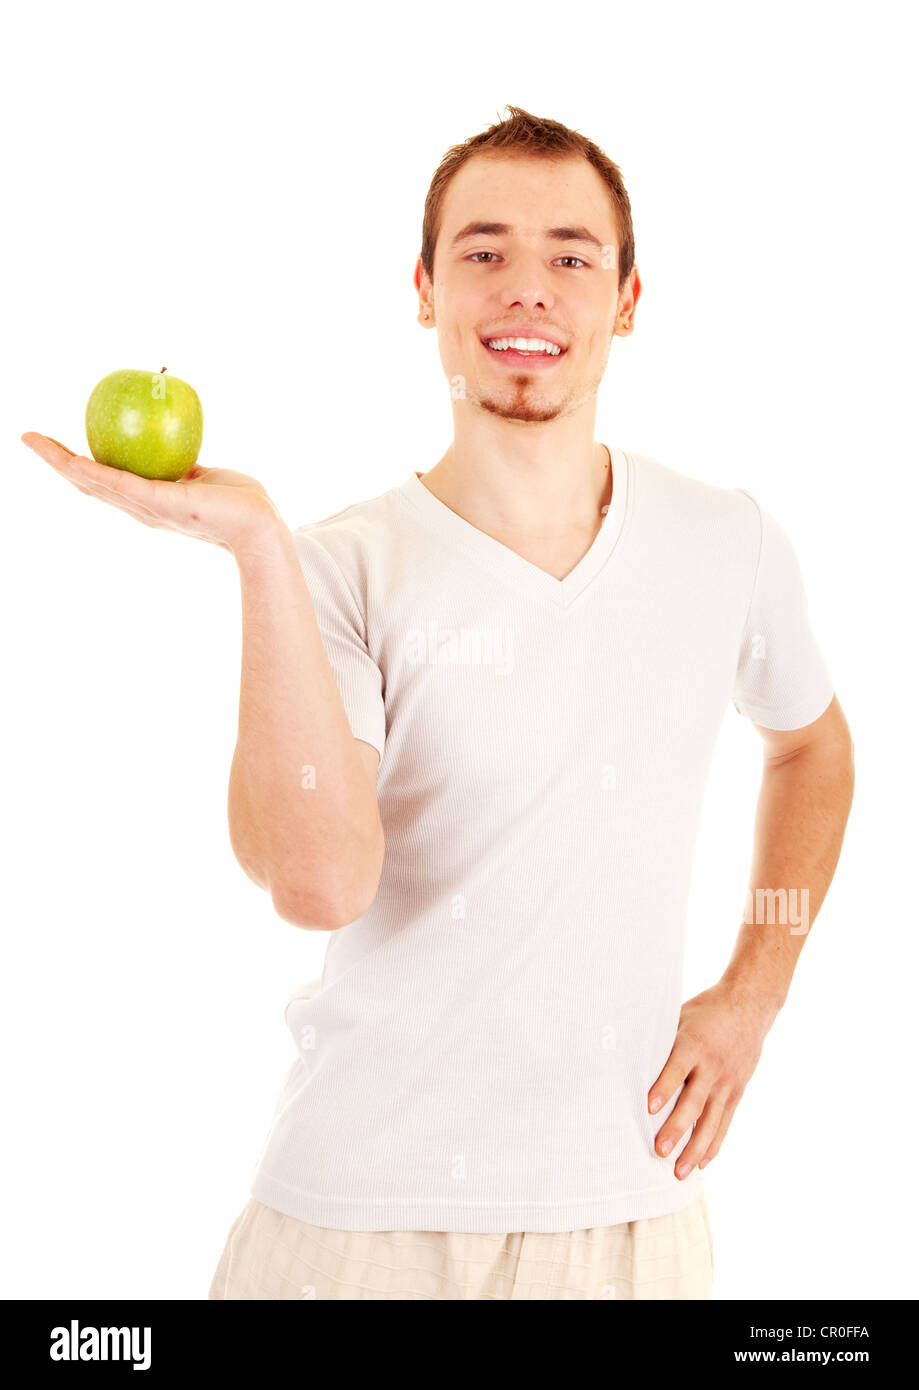 Young handsome man is holding a green apple on his palm. On white background. Stock Photo